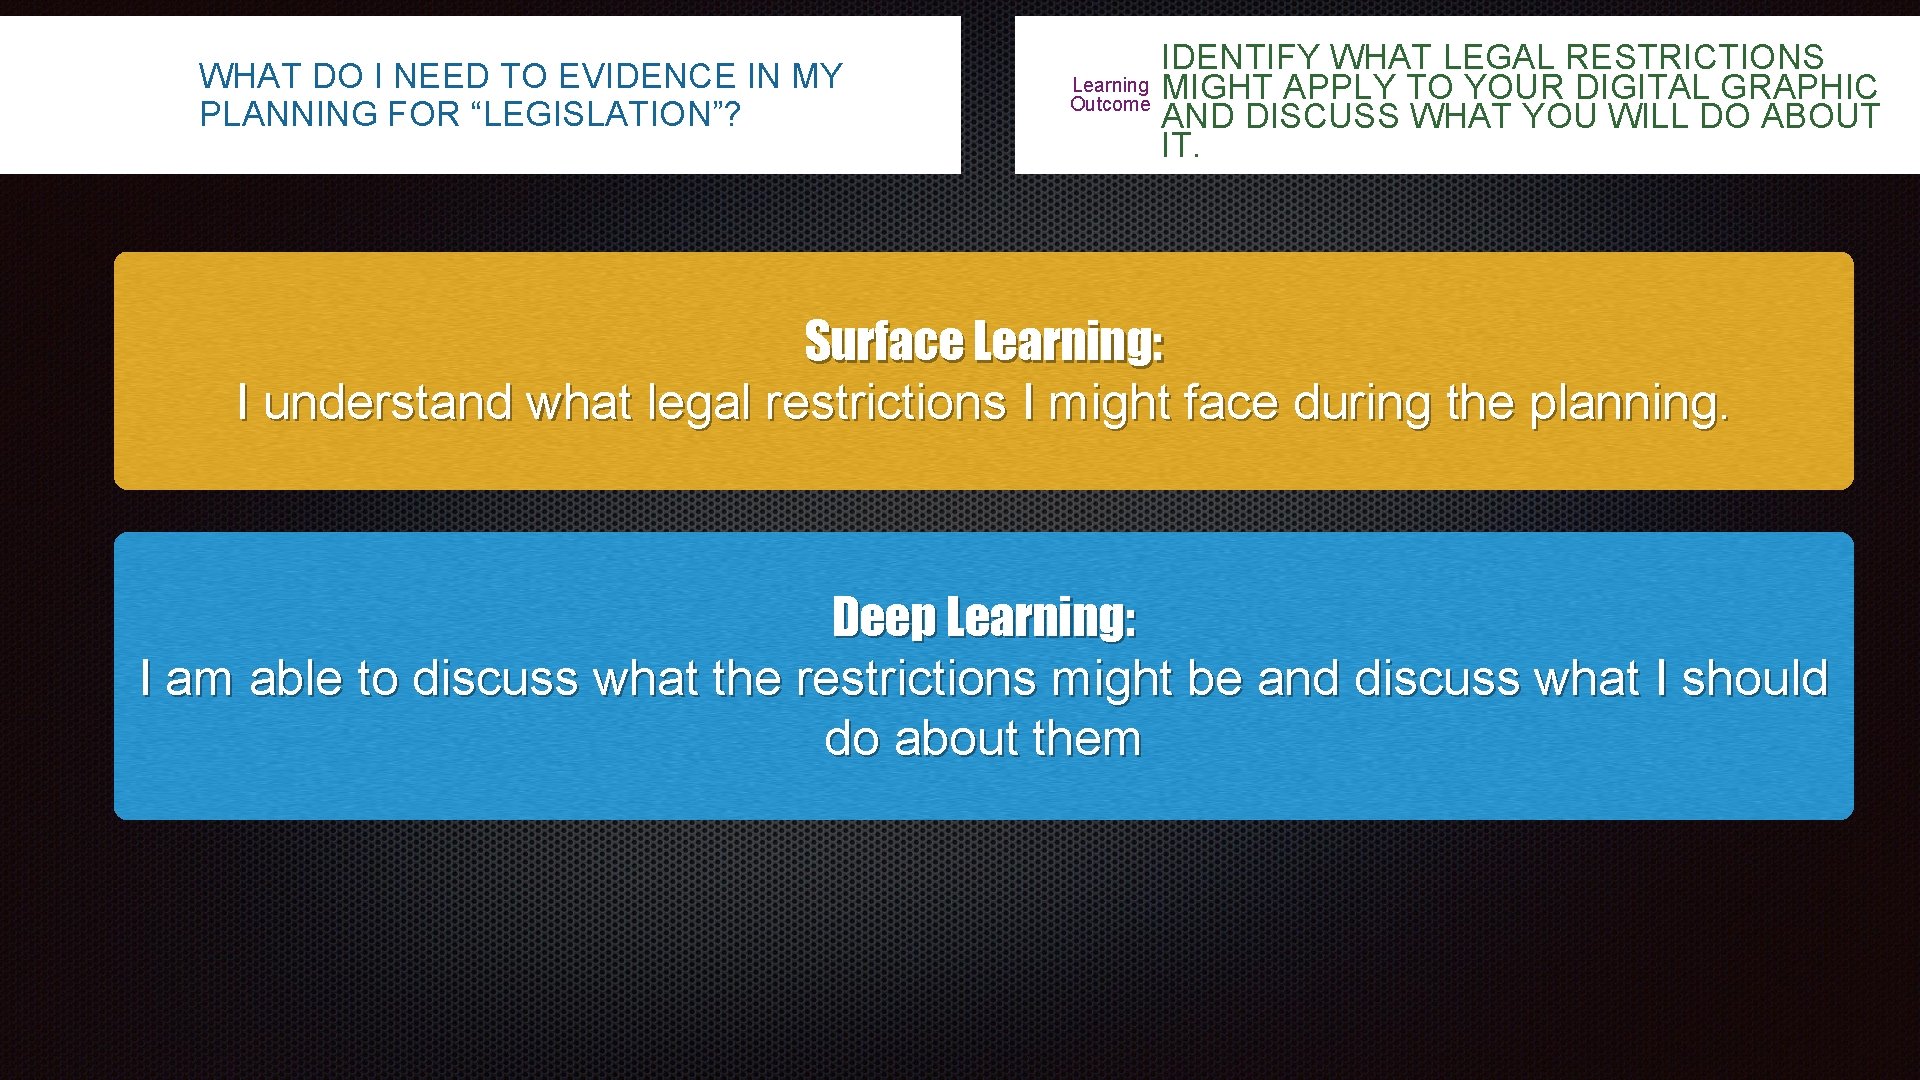 WHAT DO I NEED TO EVIDENCE IN MY PLANNING FOR “LEGISLATION”? IDENTIFY WHAT LEGAL